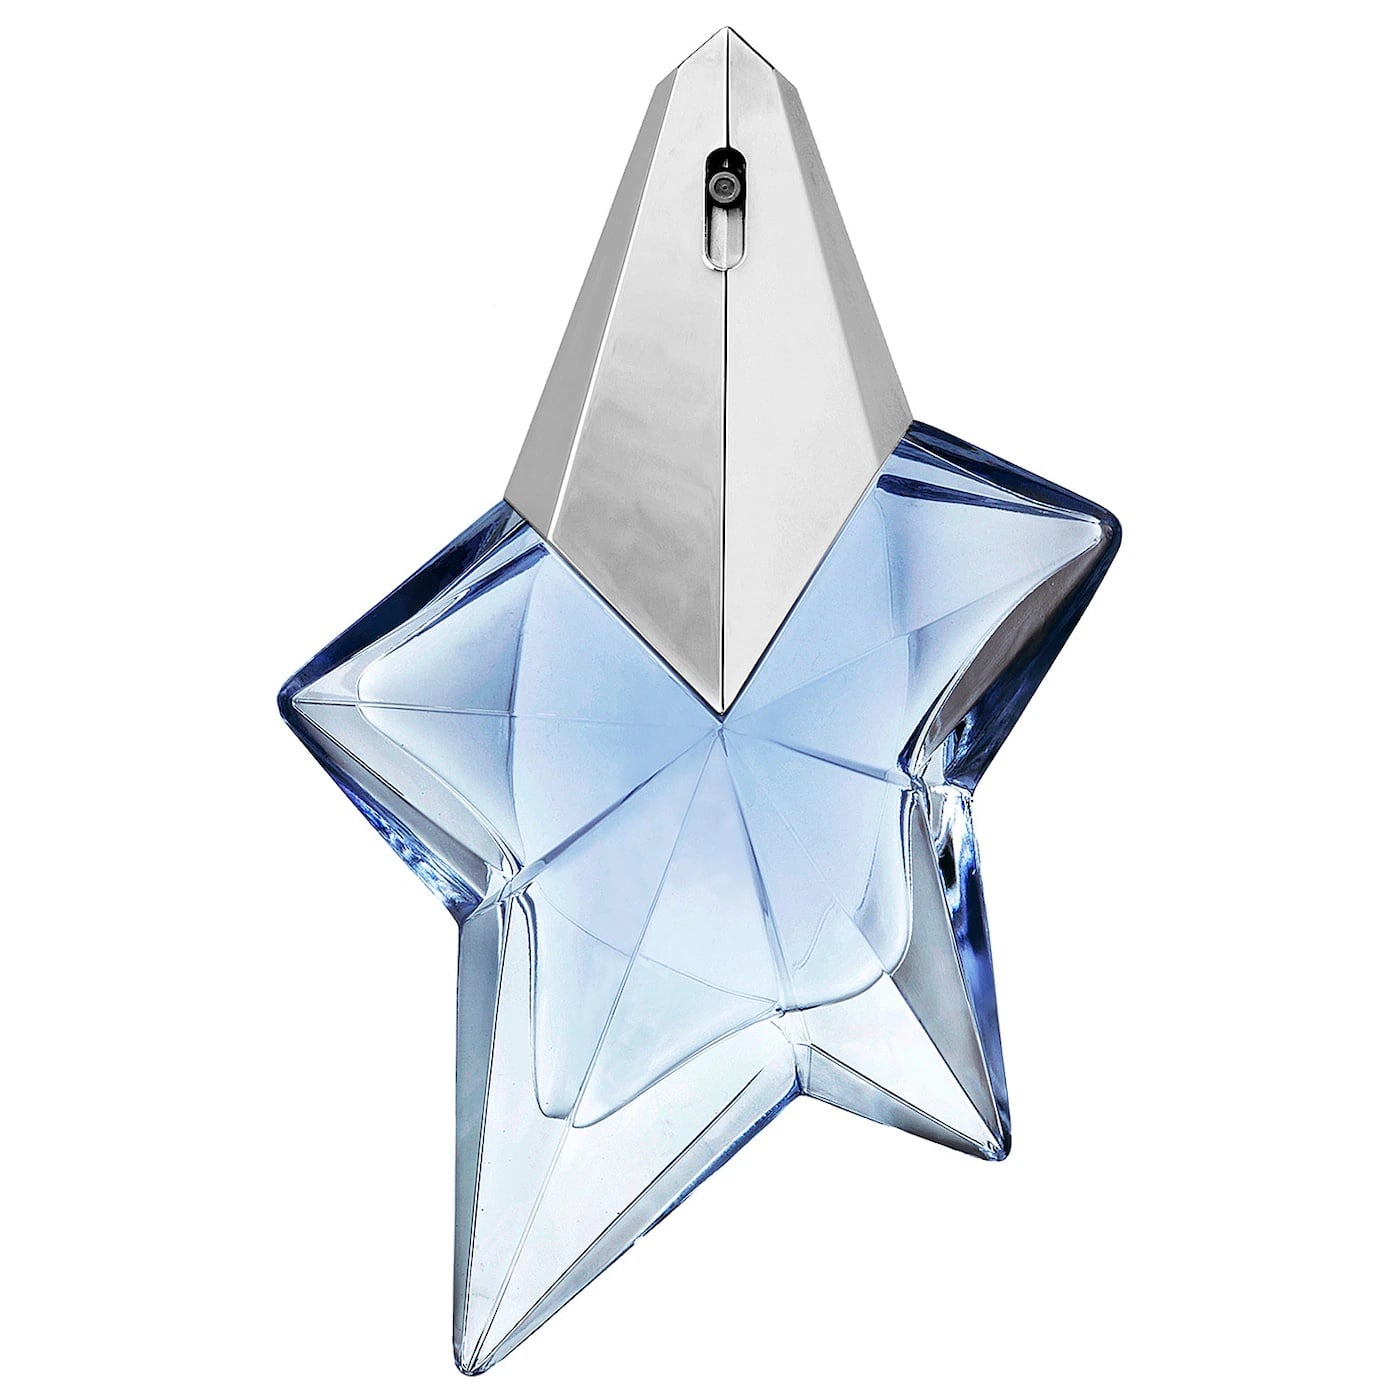 <p><strong><a href="https://www.sephora.com/product/angel-P9864" class="ga-track">Thierry Mugler Angel Eau de Parfum</a></strong> ($95)</p> <p> Though this scent came out in the early '90s, reviewers still praise its aroma and how gift-worthy it is. The earthy notes paired with the spicy elements create an earthy-fresh perfume. </p>